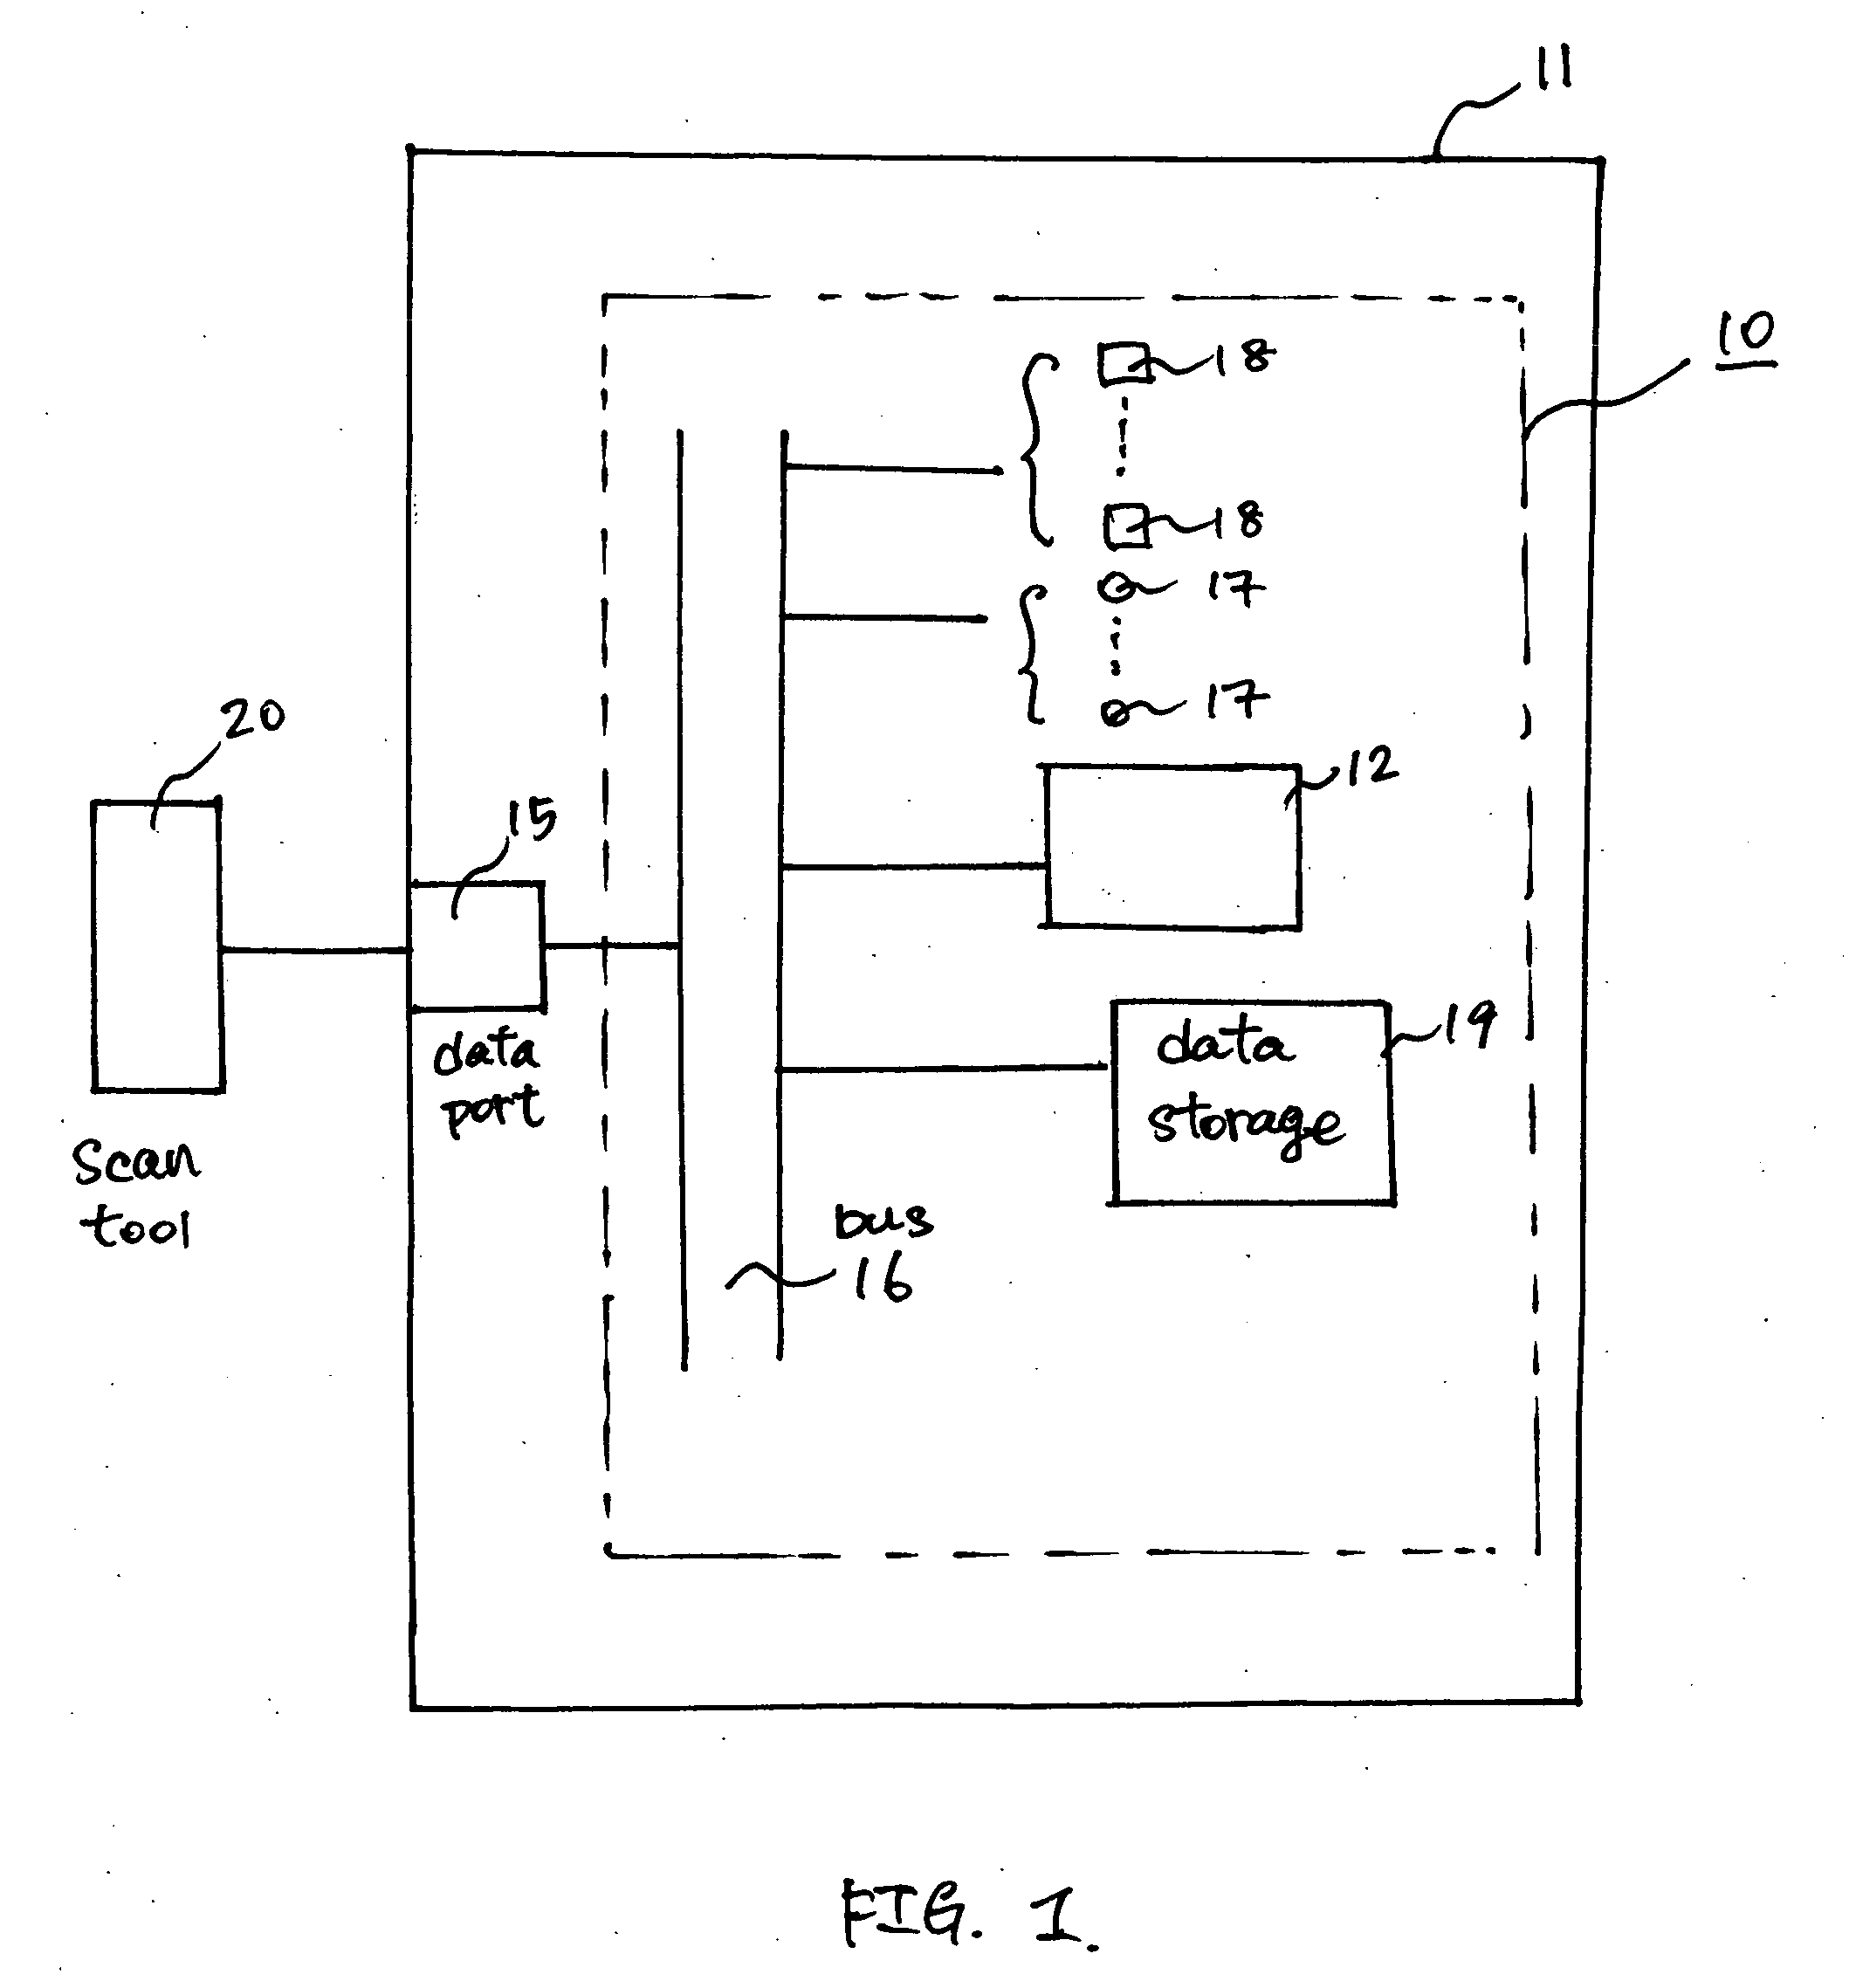 Vehicle diagnostic method and system with intelligent data collection